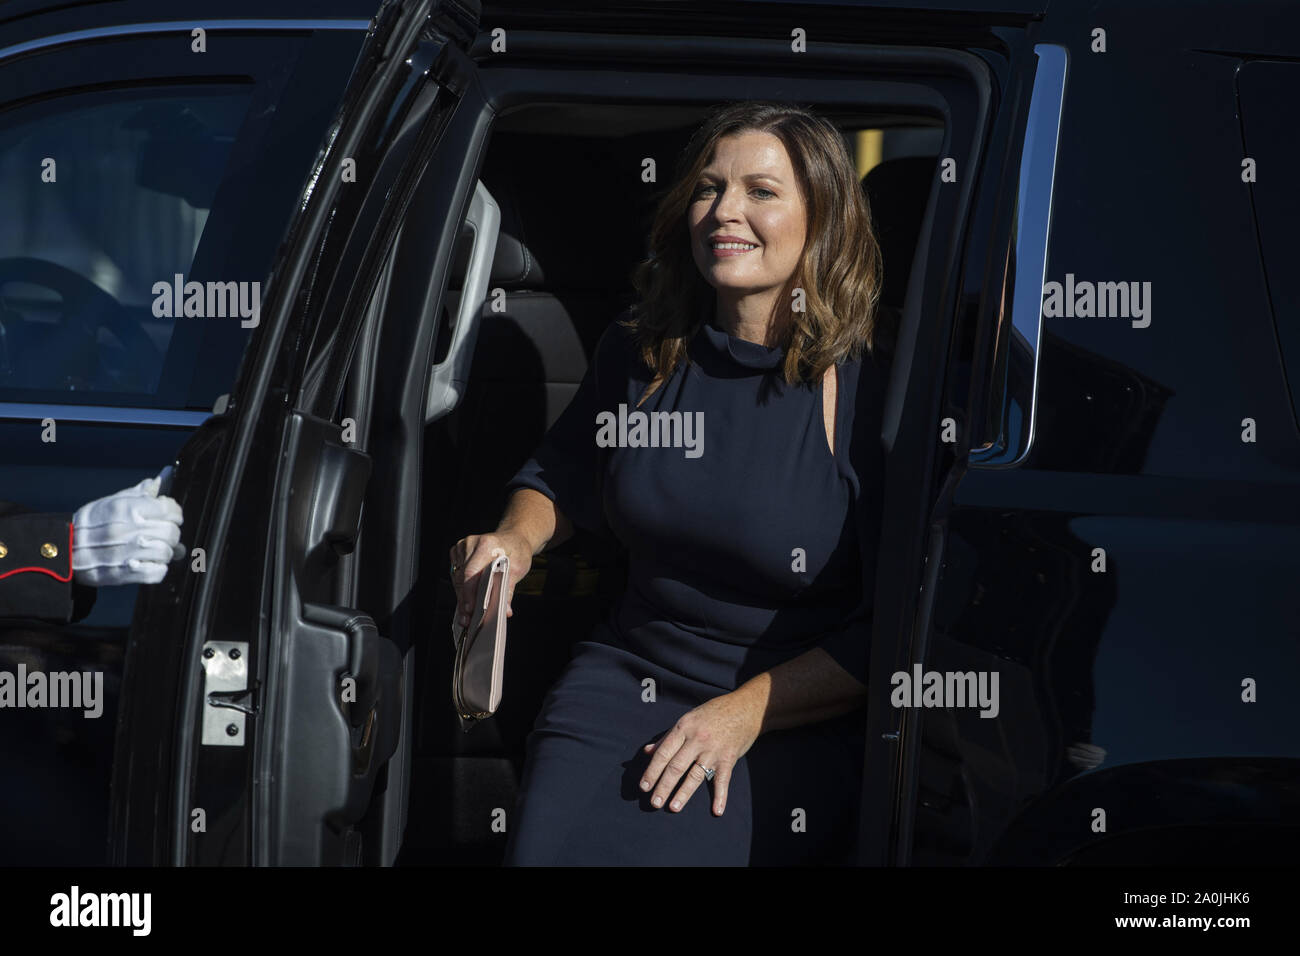 Washington DC, USA . 20th Sep, 2019. Washington DC, USA. 20th Sep, 2019. Jenny Morrison, wife of Prime Minister of Australia Scott Morrison arrives to the South Lawn of the White House for a state arrival ceremony in Washington, DC on Friday, September 20, 2019. The occasion marks the second state visit of Donald Trump's presidency. Credit: UPI/Alamy Live News Stock Photo